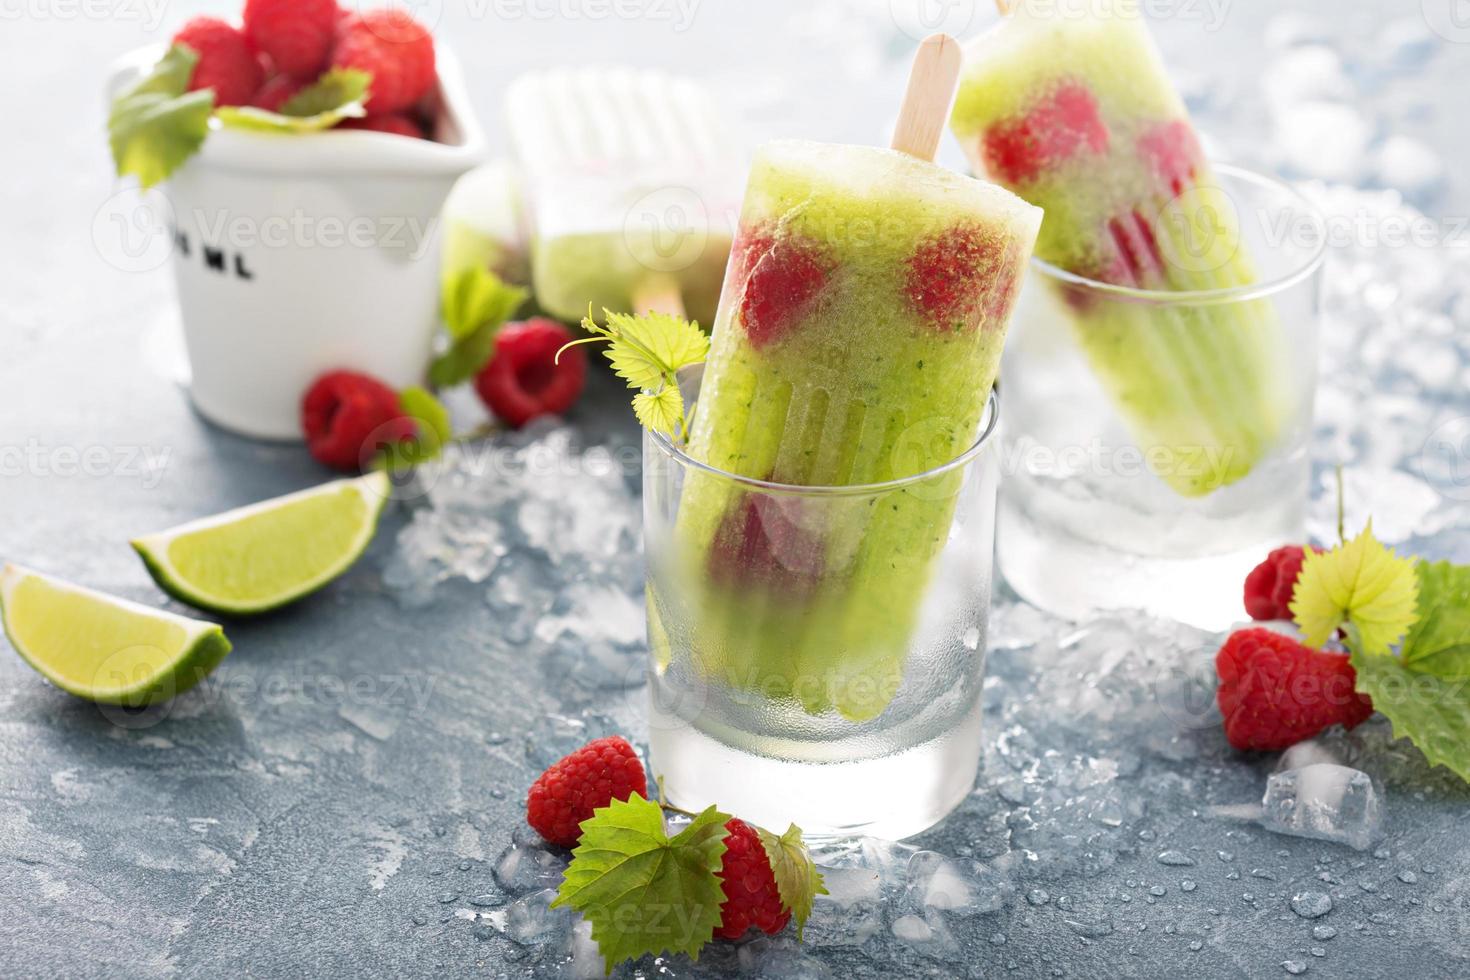 Cucumber lime raspberry spa popsicles photo